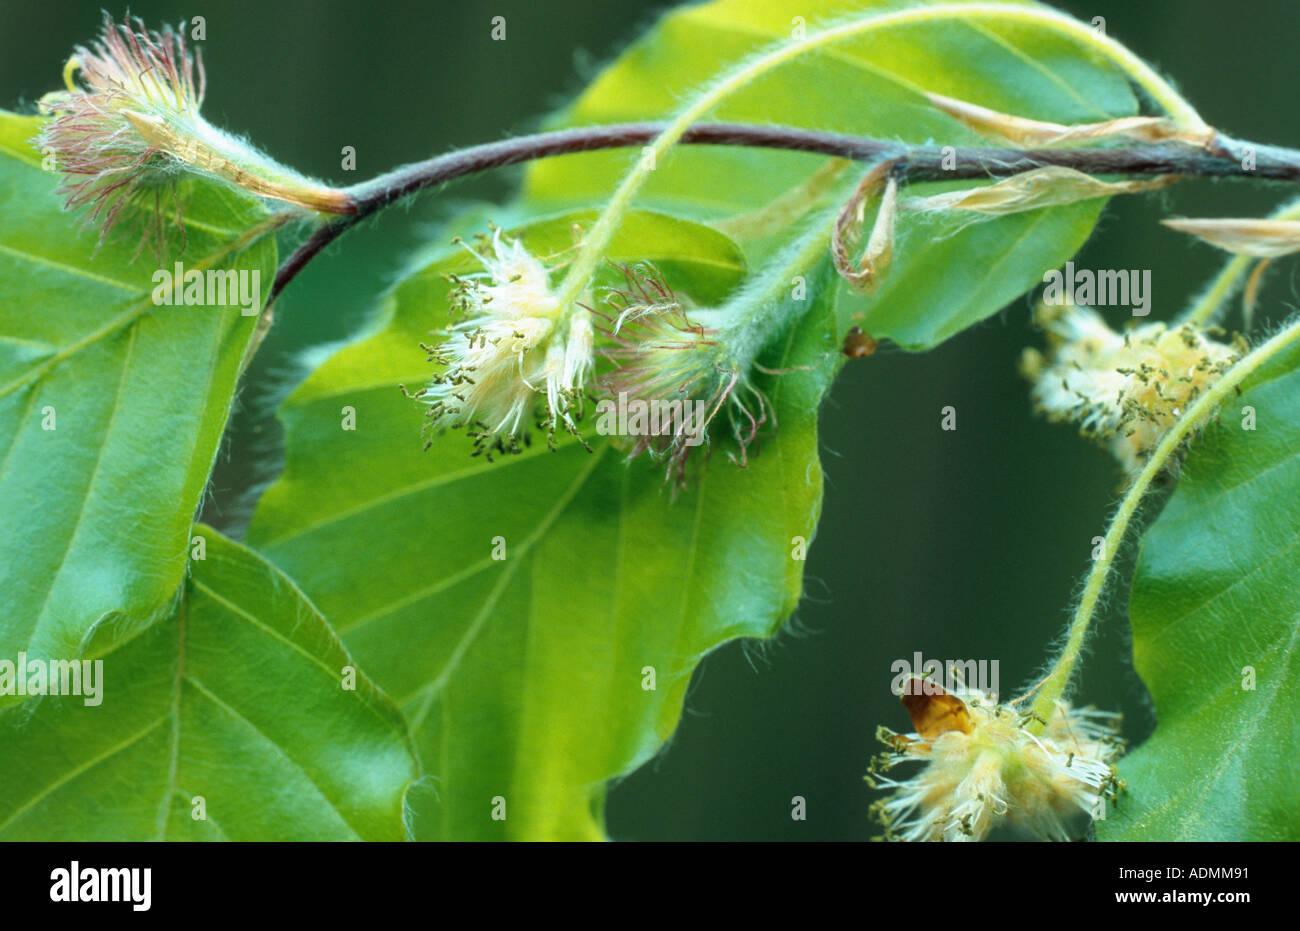 common beech (Fagus sylvatica), male and female blossoms Stock Photo